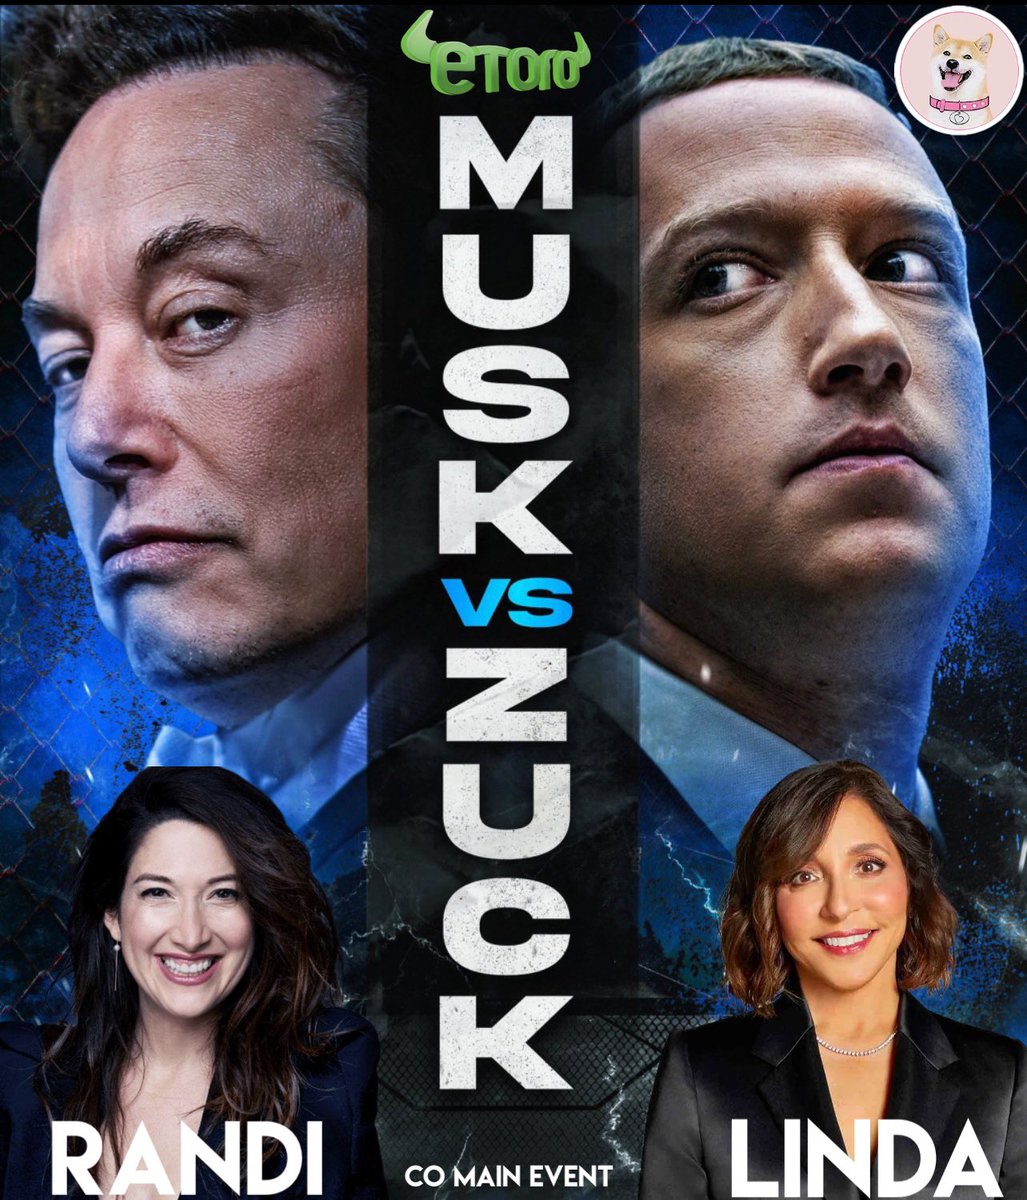 Ladies and Gentlemen…….. #itstime The Main event and co main event is set 69 days after 420 #zuckvsmusk and @lindayacc vs @randizuckerberg this is gonna be fire 🔥 @dogegftoken @elonmusk @TheMoonCarl @dogeofficialceo @Dogememegirl